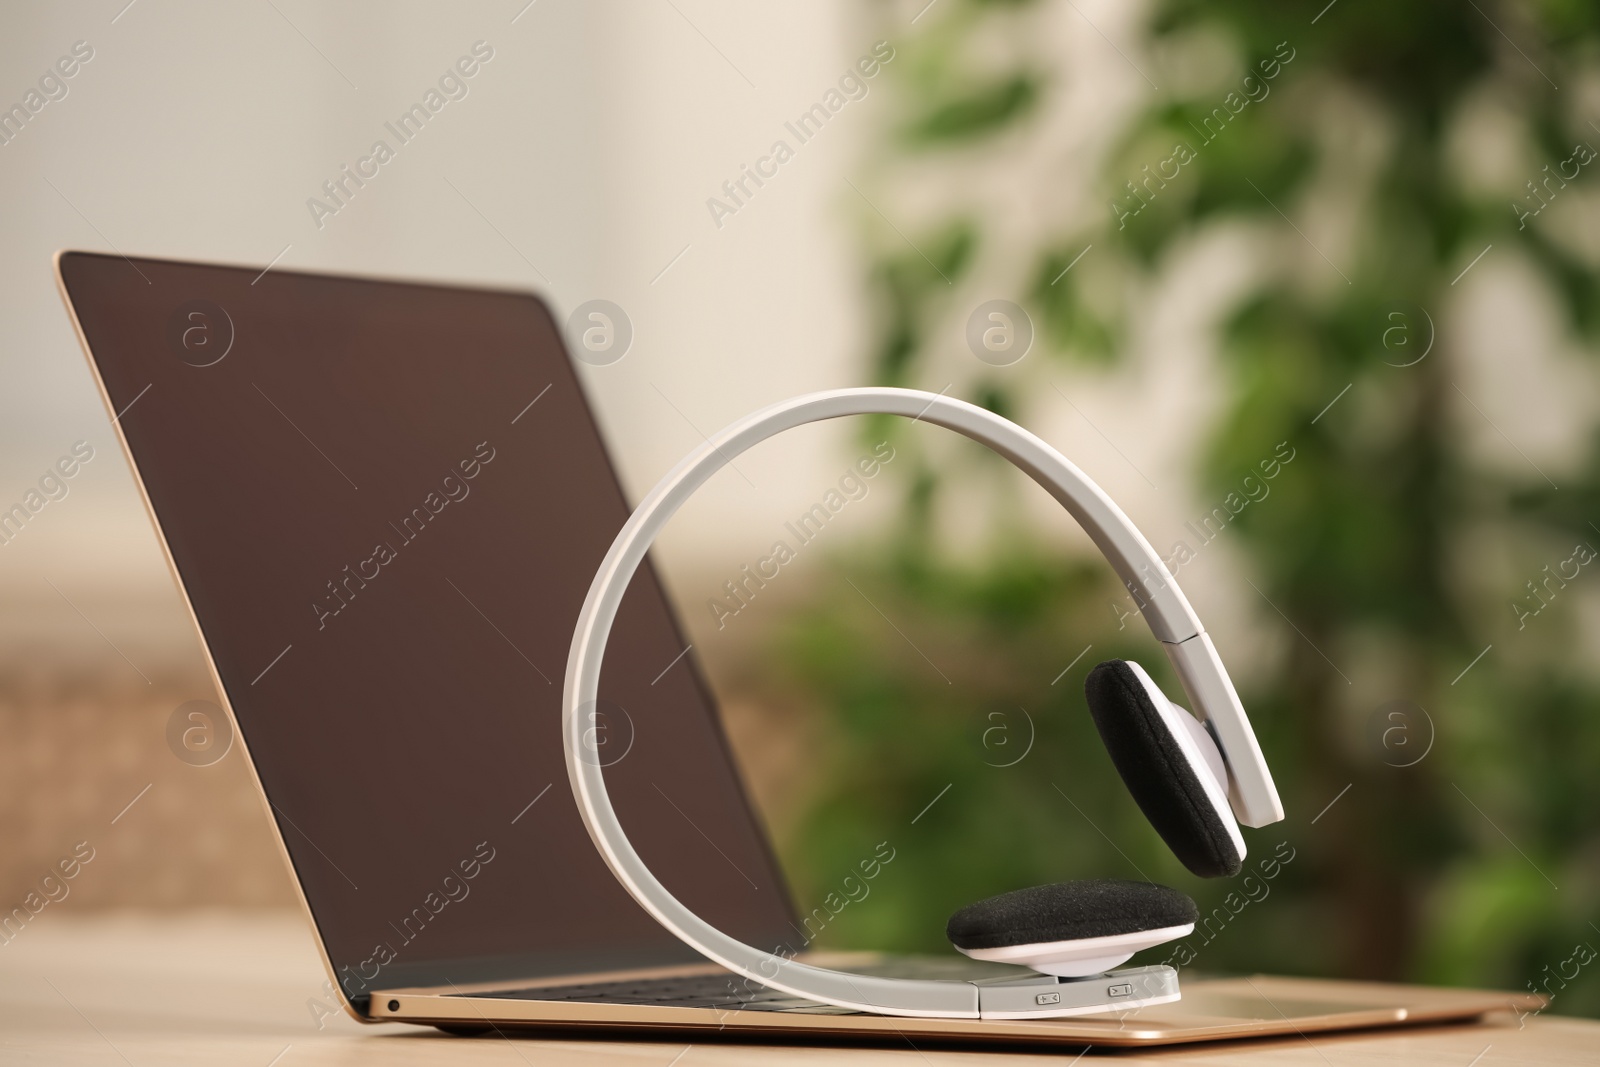 Photo of Modern headphones and laptop on table indoors